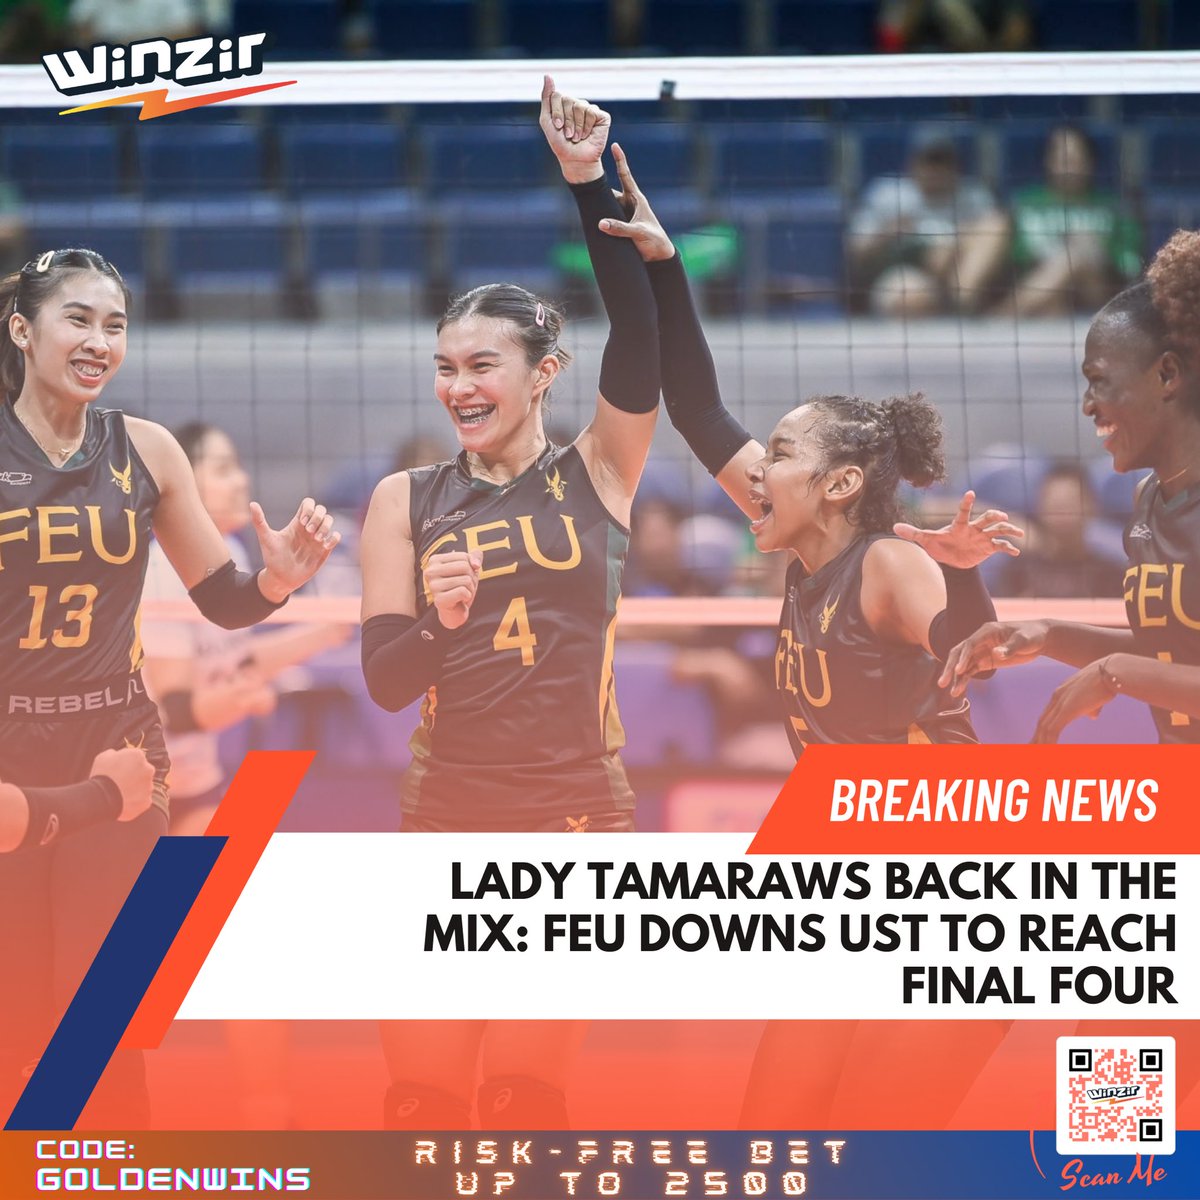 With incredible determination, the FEU Lady Tamaraws overcame the challenge from the UST Tigresses to claim a Final Four spot! 🐃🔥

Register in WinZir here: winzir.ph/affiliates/?bt… ⚡️

#winzir #sportsbetting #volleyball #UAAP #winfromwithin #keepitfun #responsiblegaming